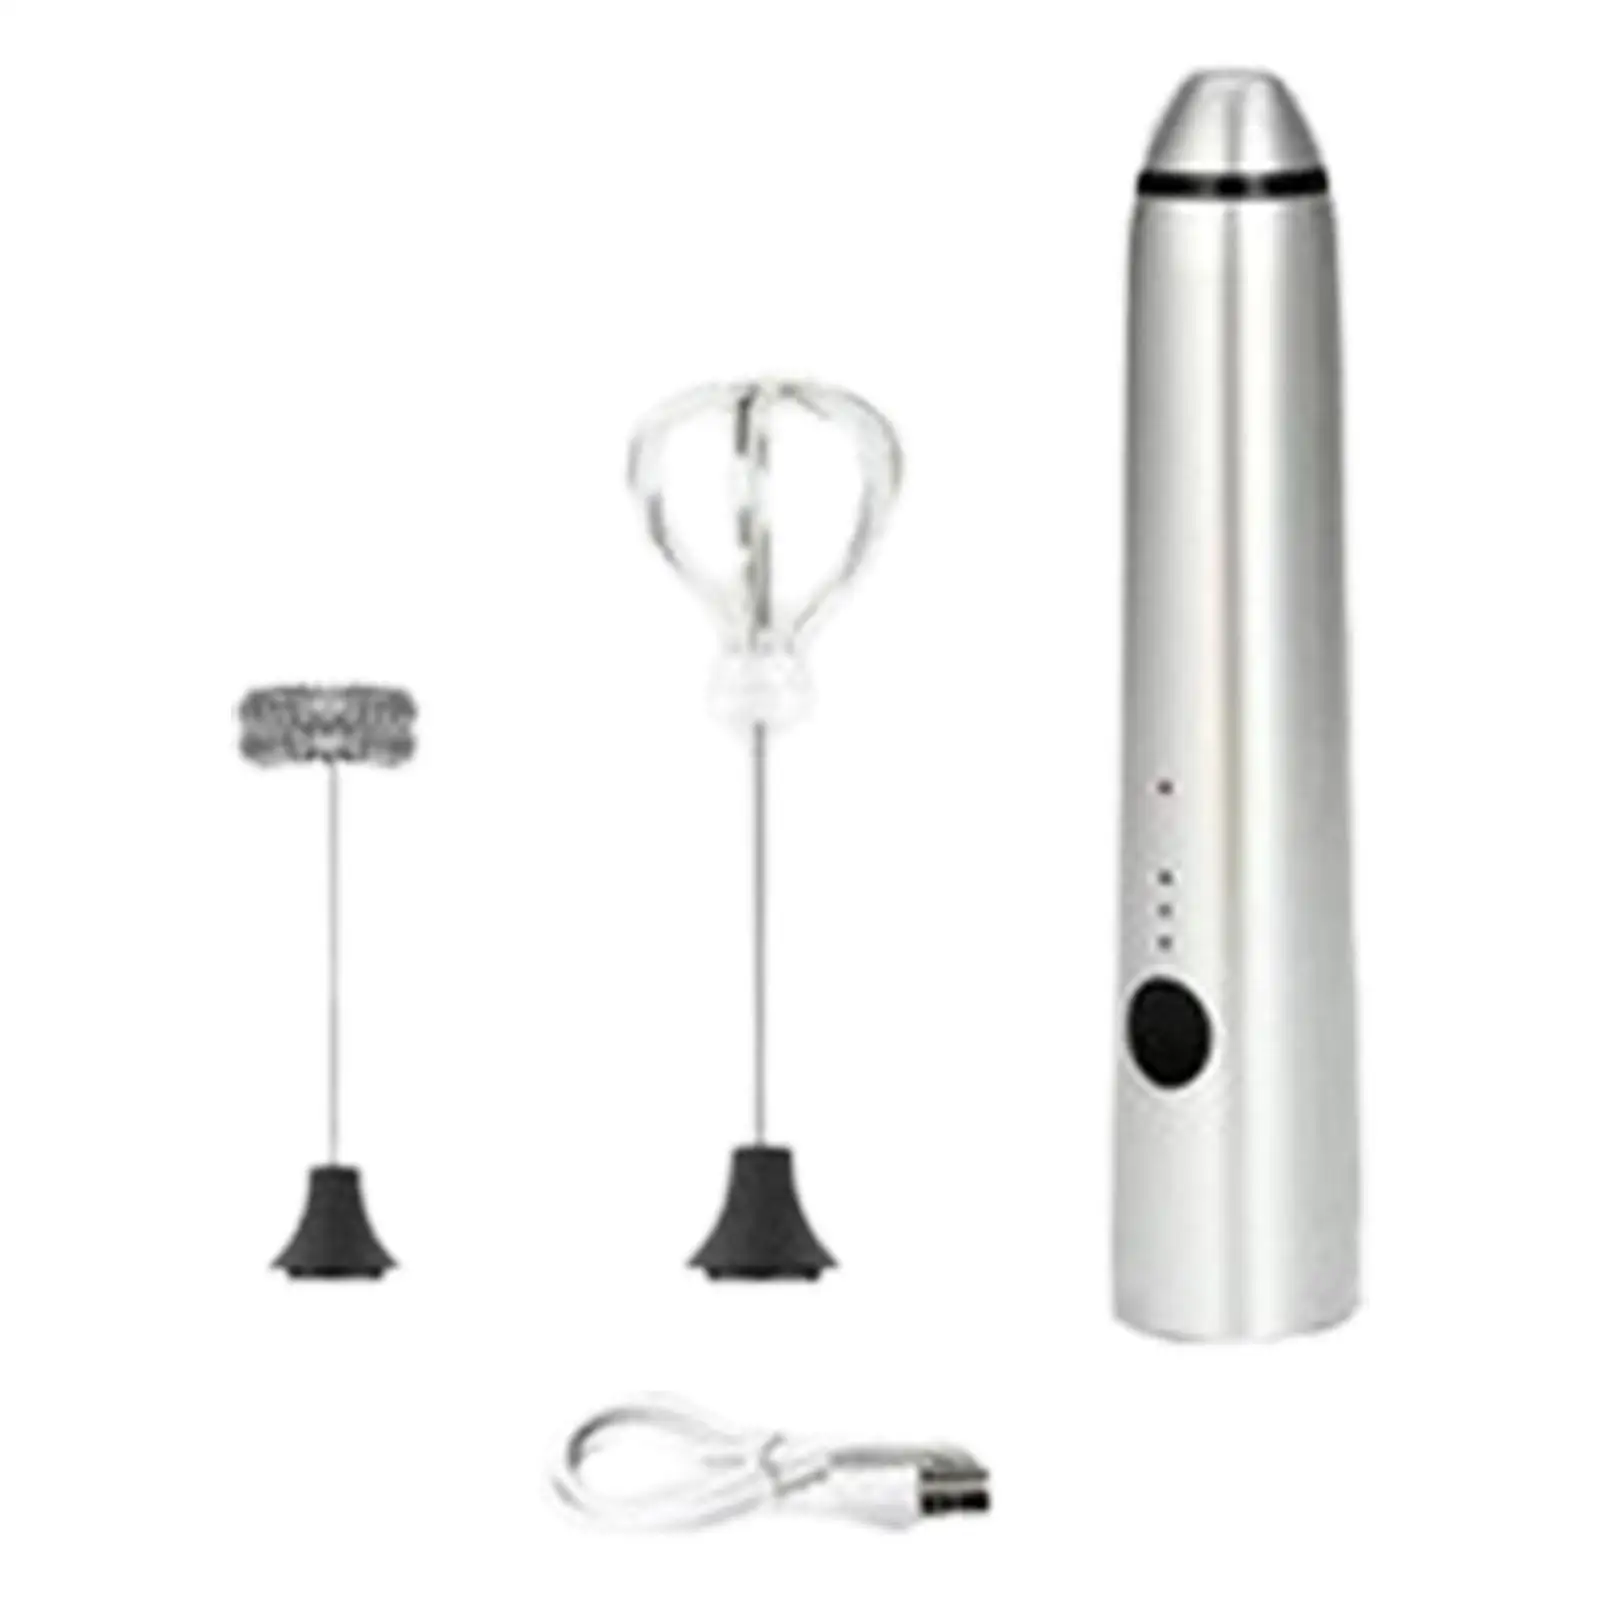 Whisk Beater Hot Chocolate Mixer Powerful Simple to Use Handheld Coffee Frother for Latte Cappuccino Hot Chocolate Coffee Frappe